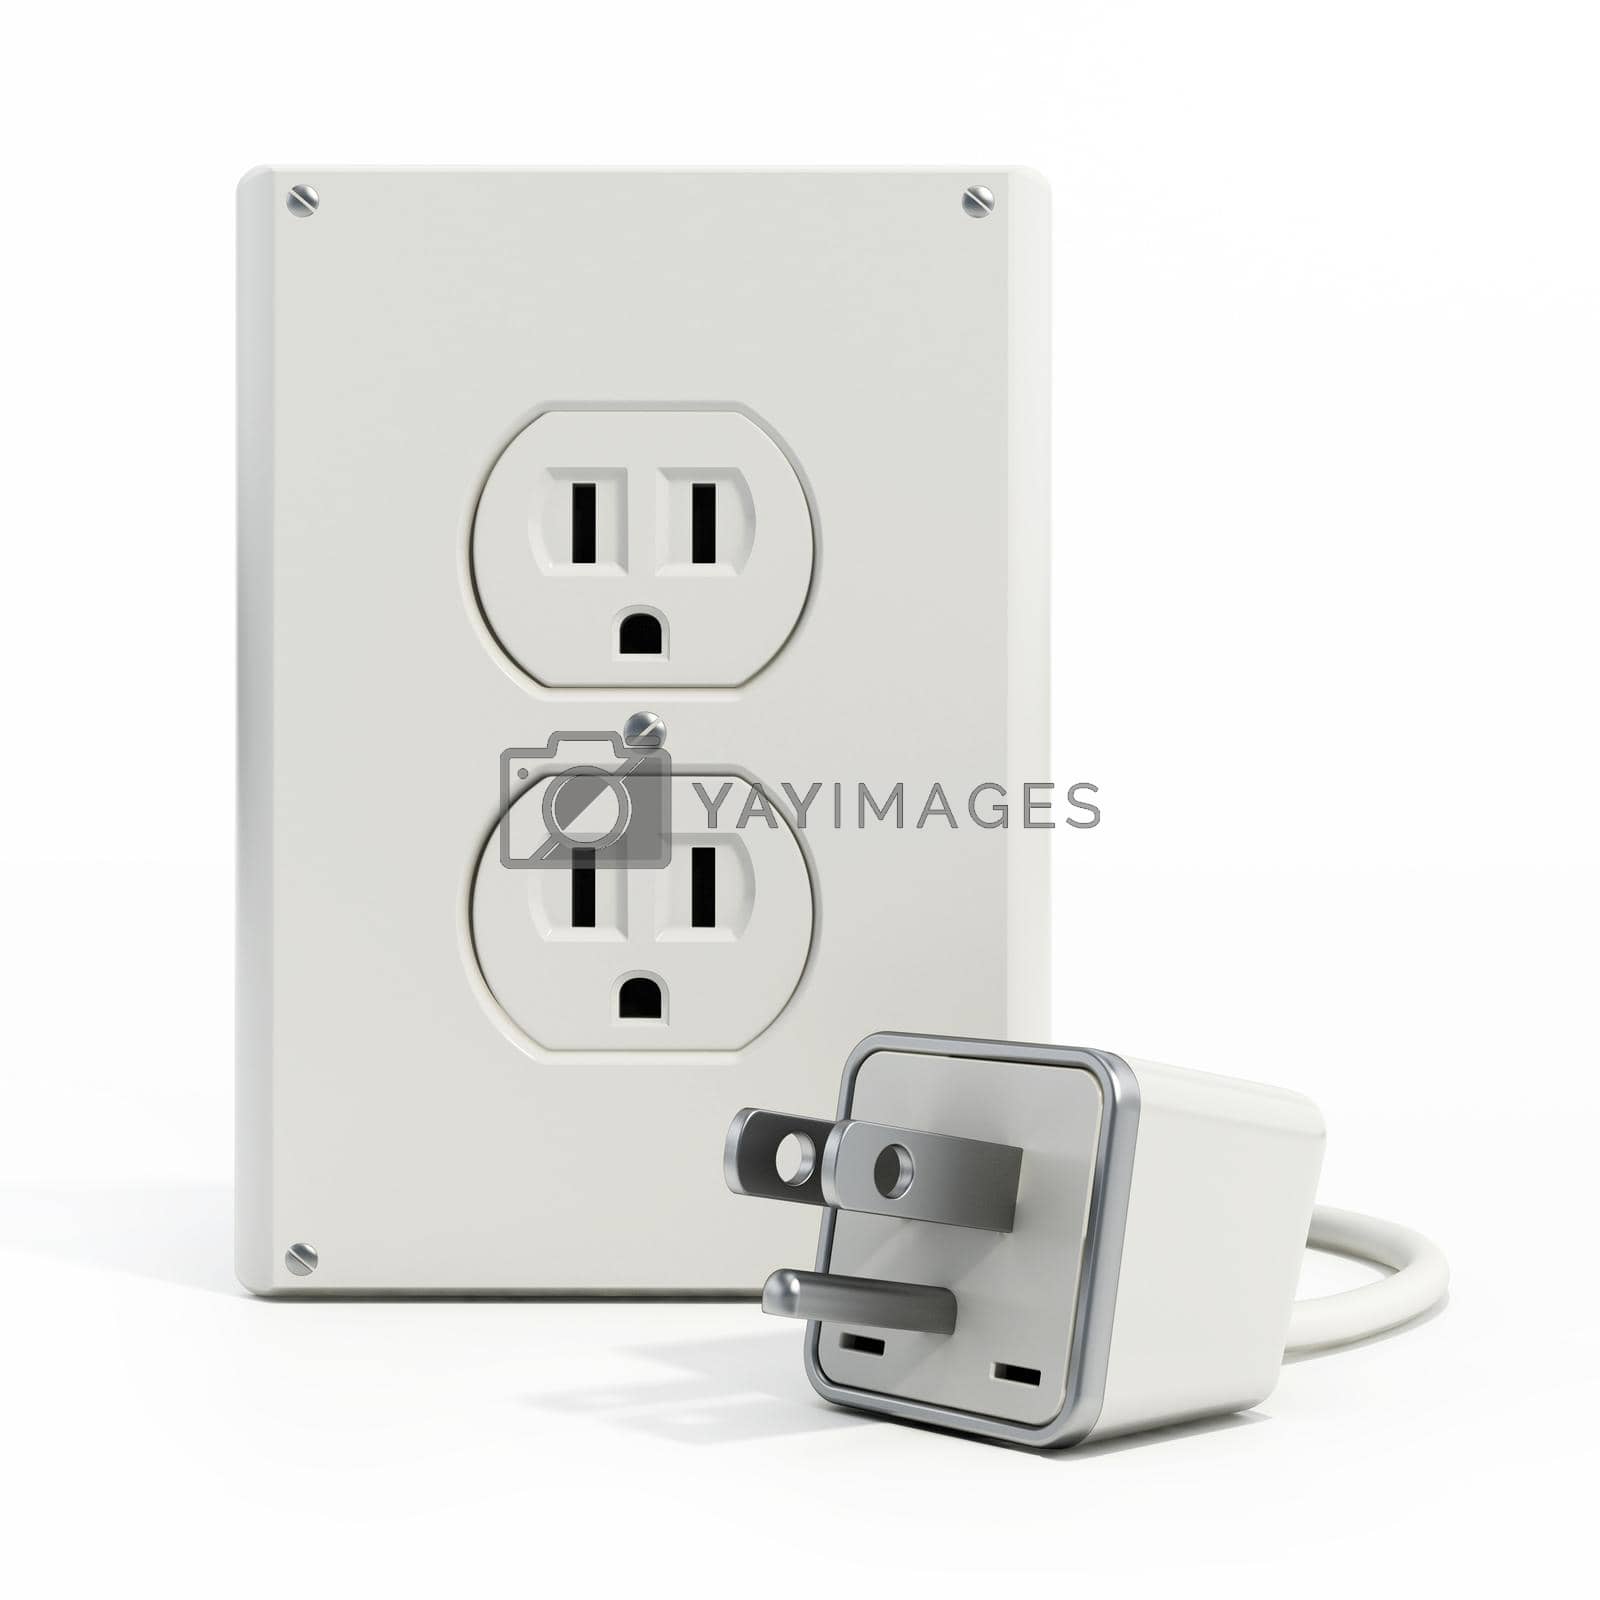 Royalty free image of USA type AC power plugs and sockets isolated on white background. 3D illustration by Simsek